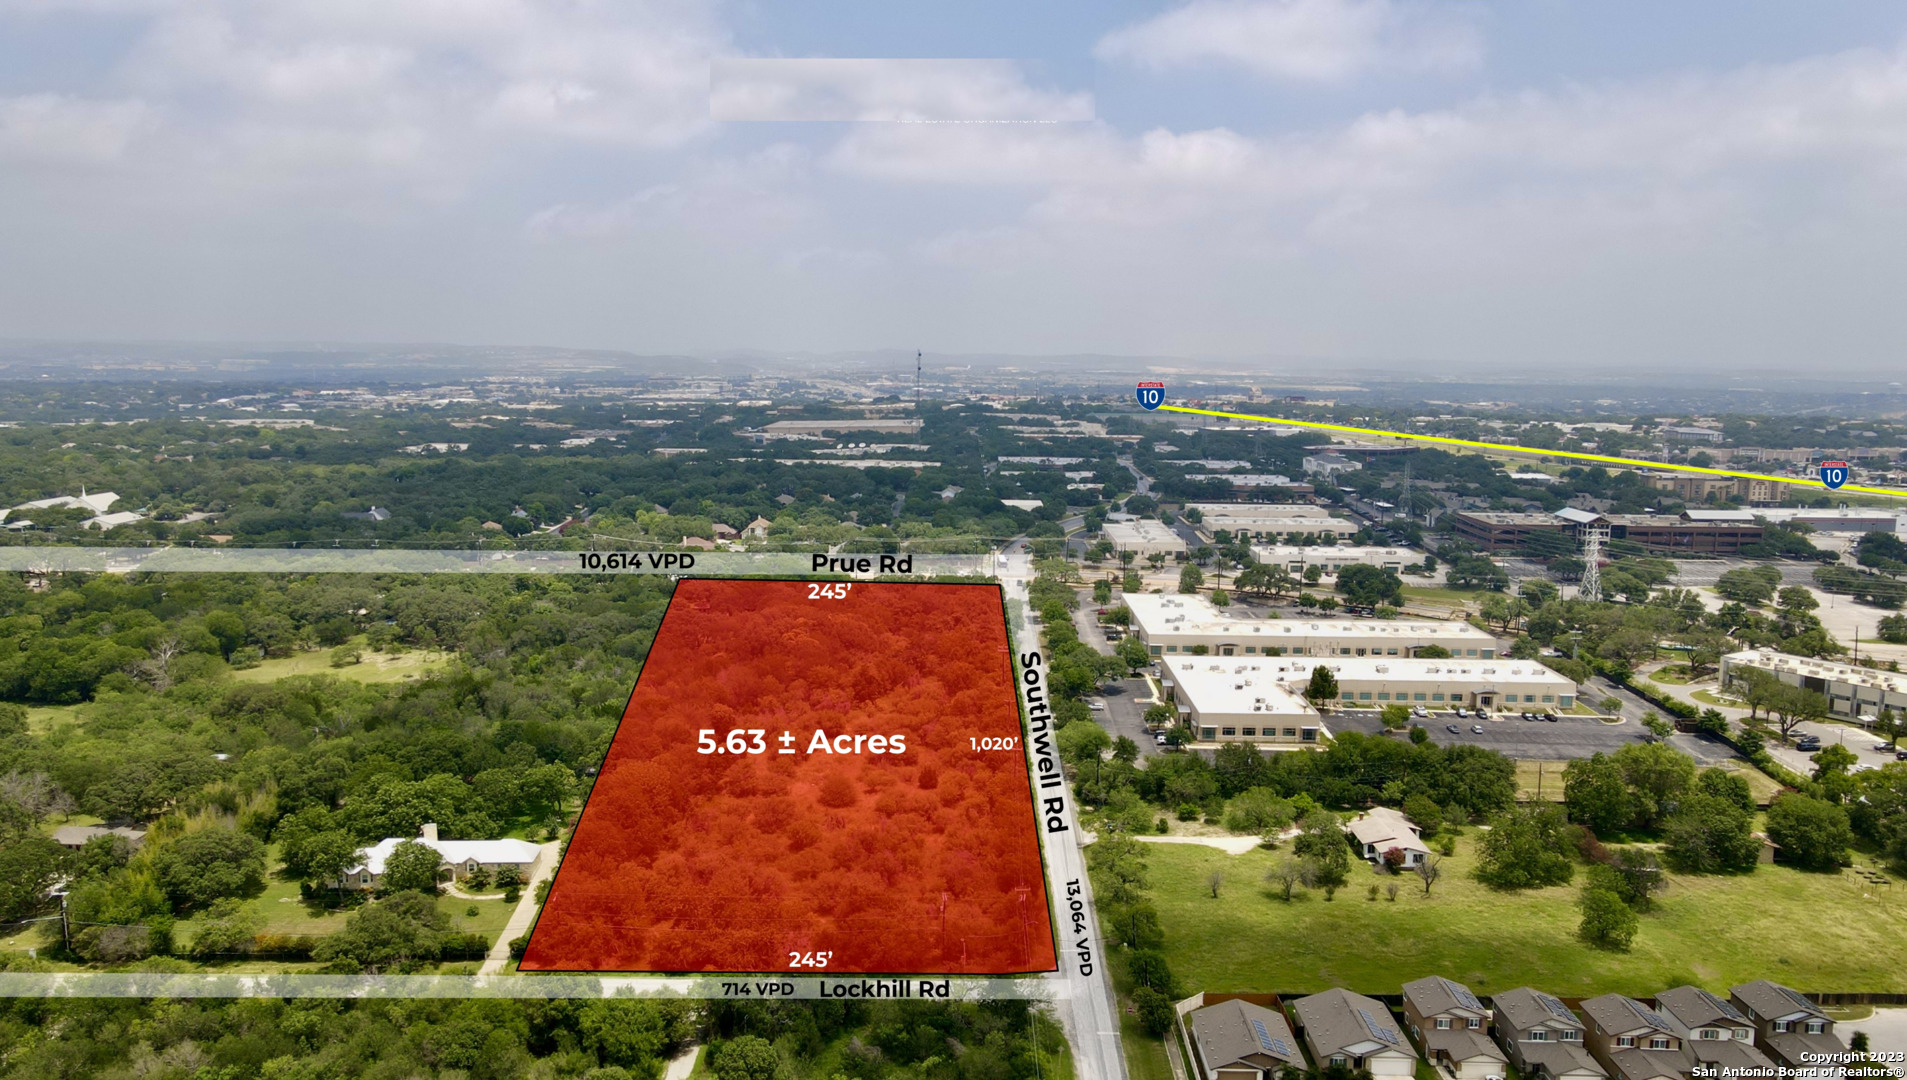 5.63 acres on Prue and Southwell Rd, San Antonio, TX 78240